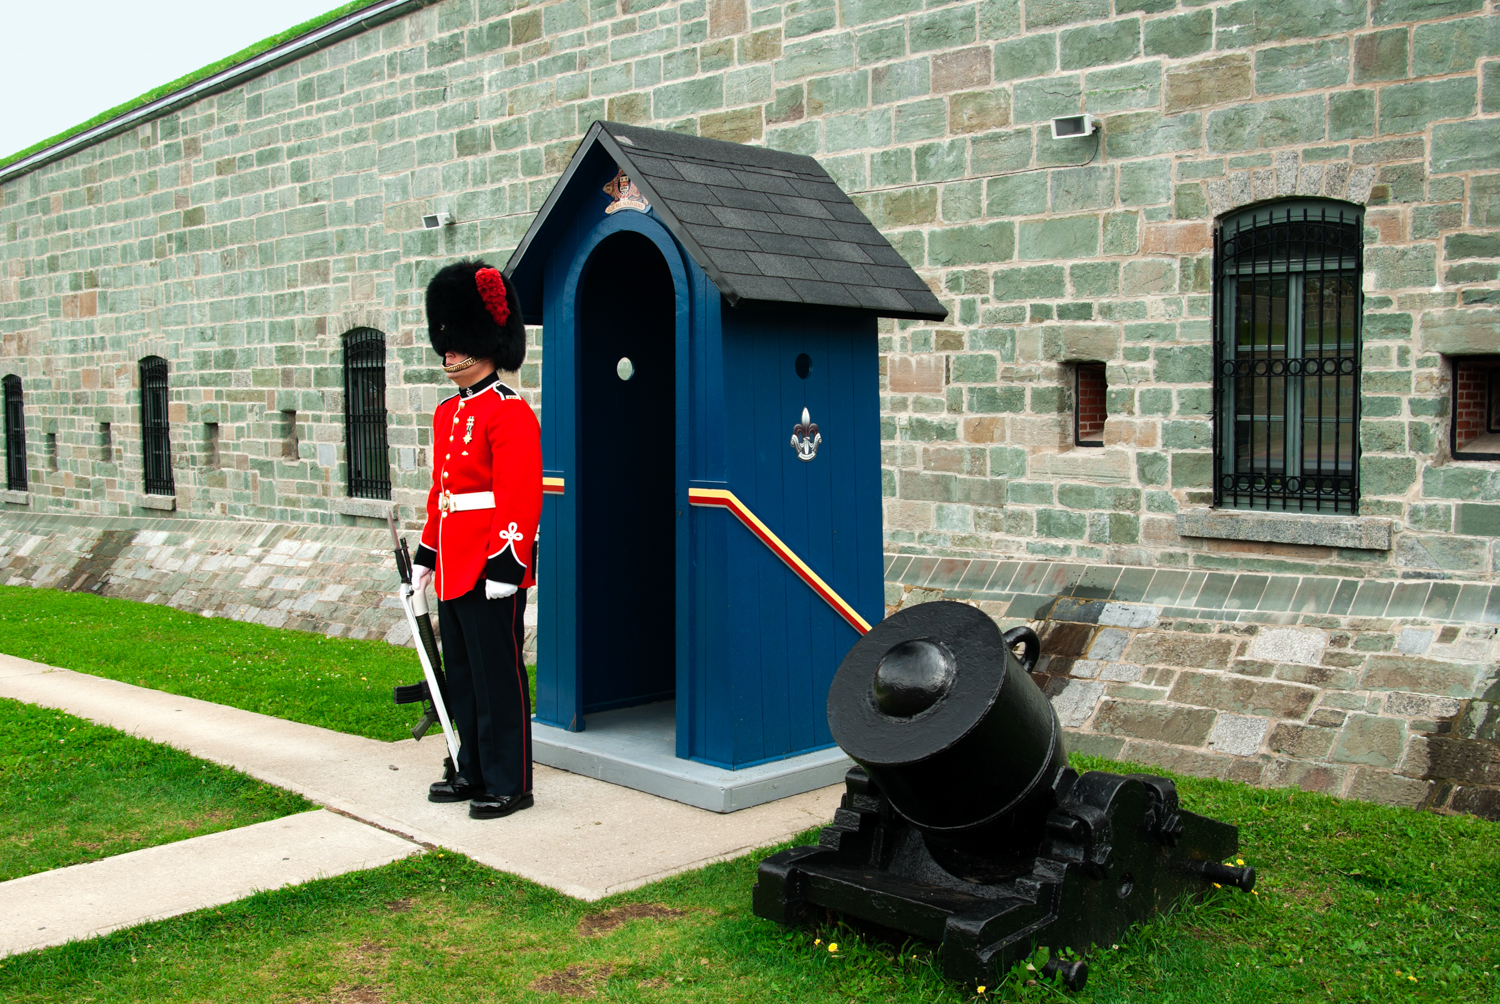 A guard stands watch at the Citadelle. Image by Emily Riddell / Lonely Planet Images / Getty